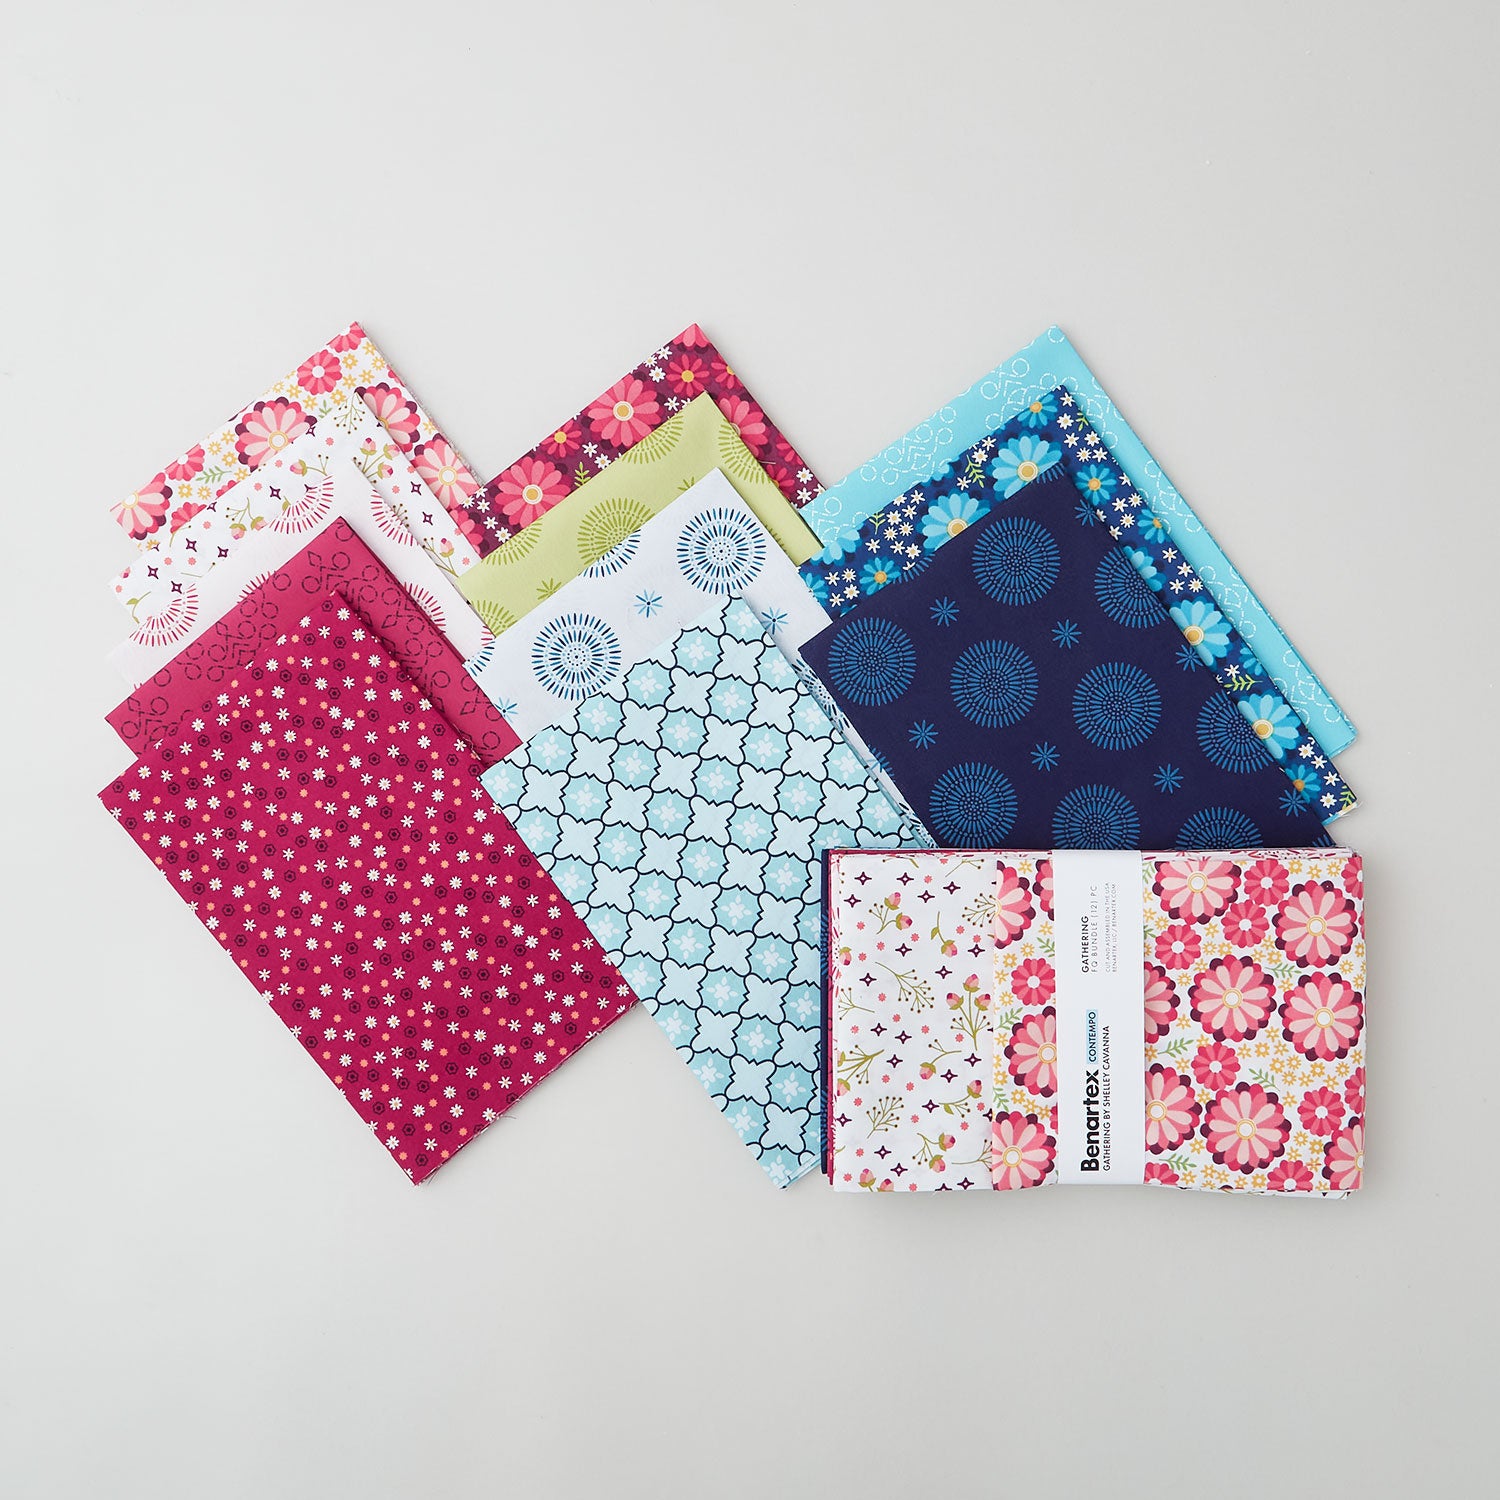 GATHERING 5 X 5 CHARM PACK – The Quilting Marine